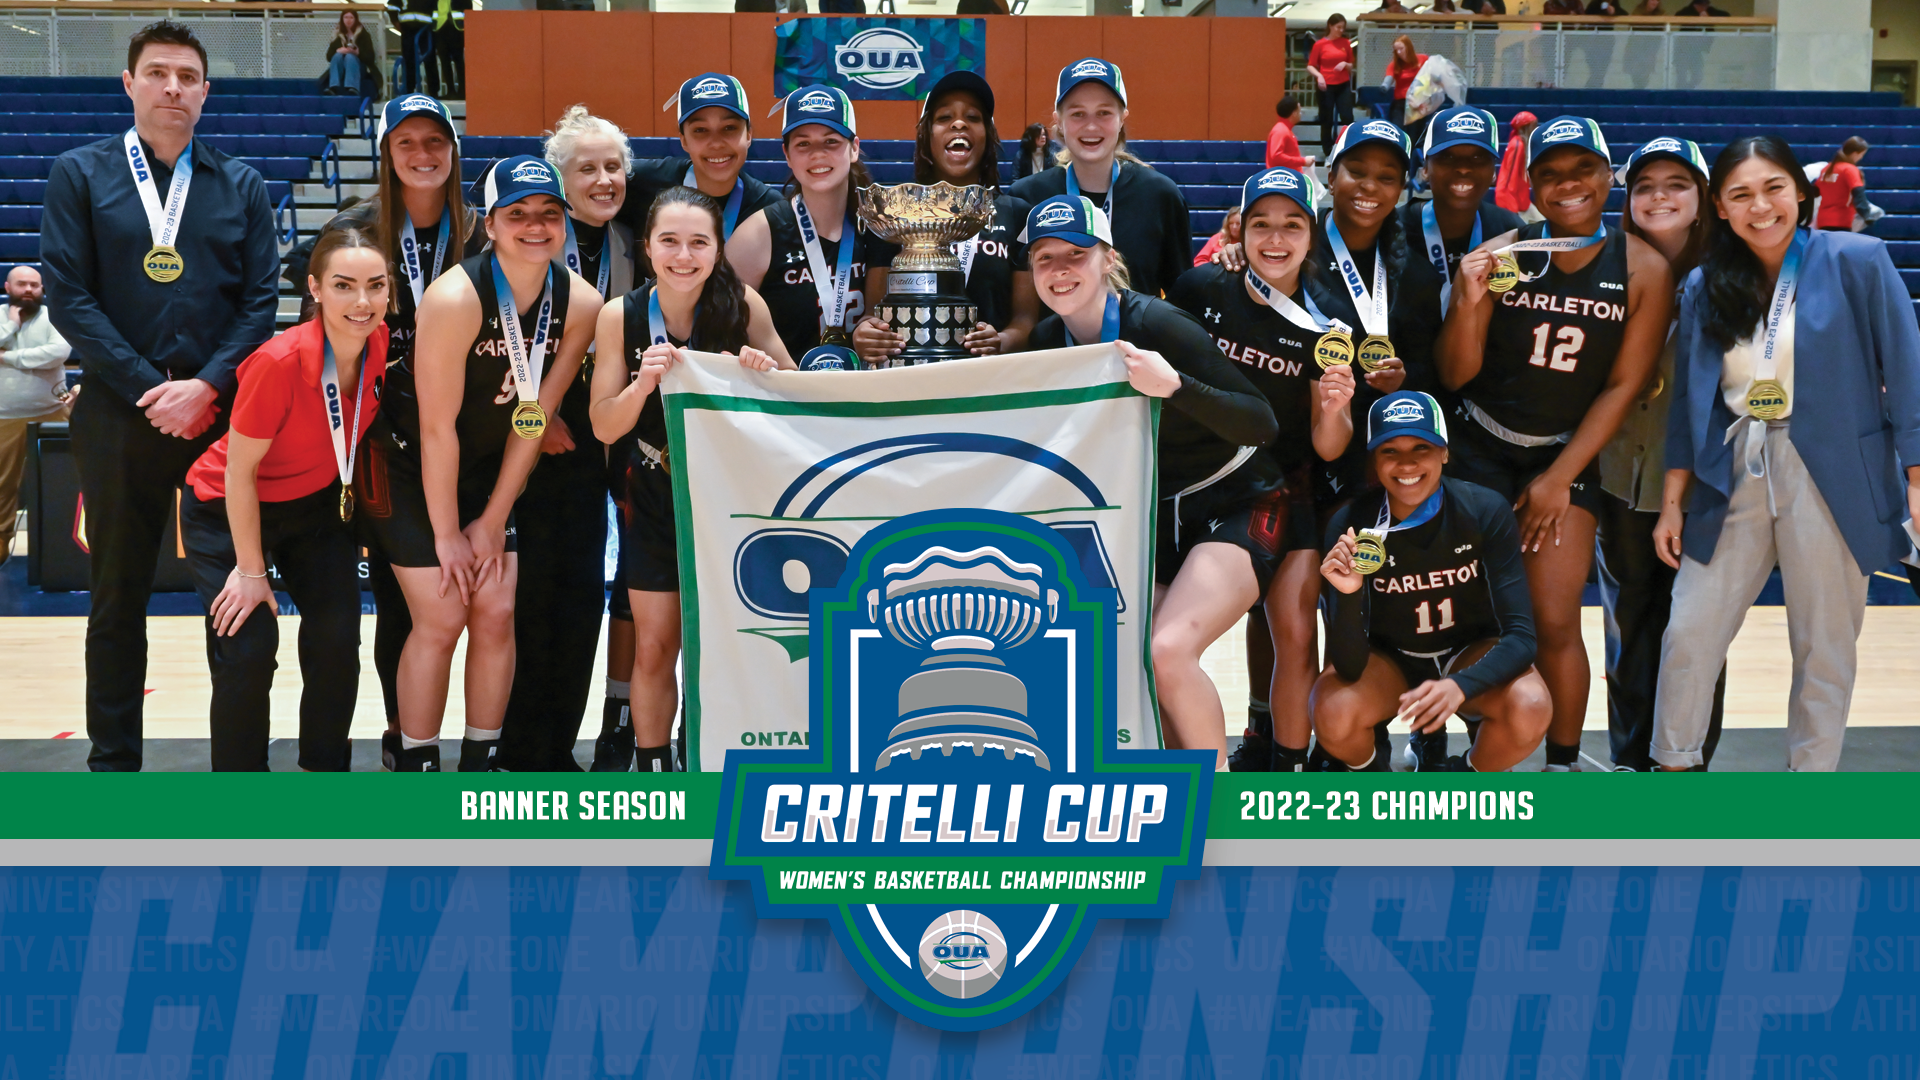 Banner Season: Ravens soar to Critelli Cup victory behind dominant second half